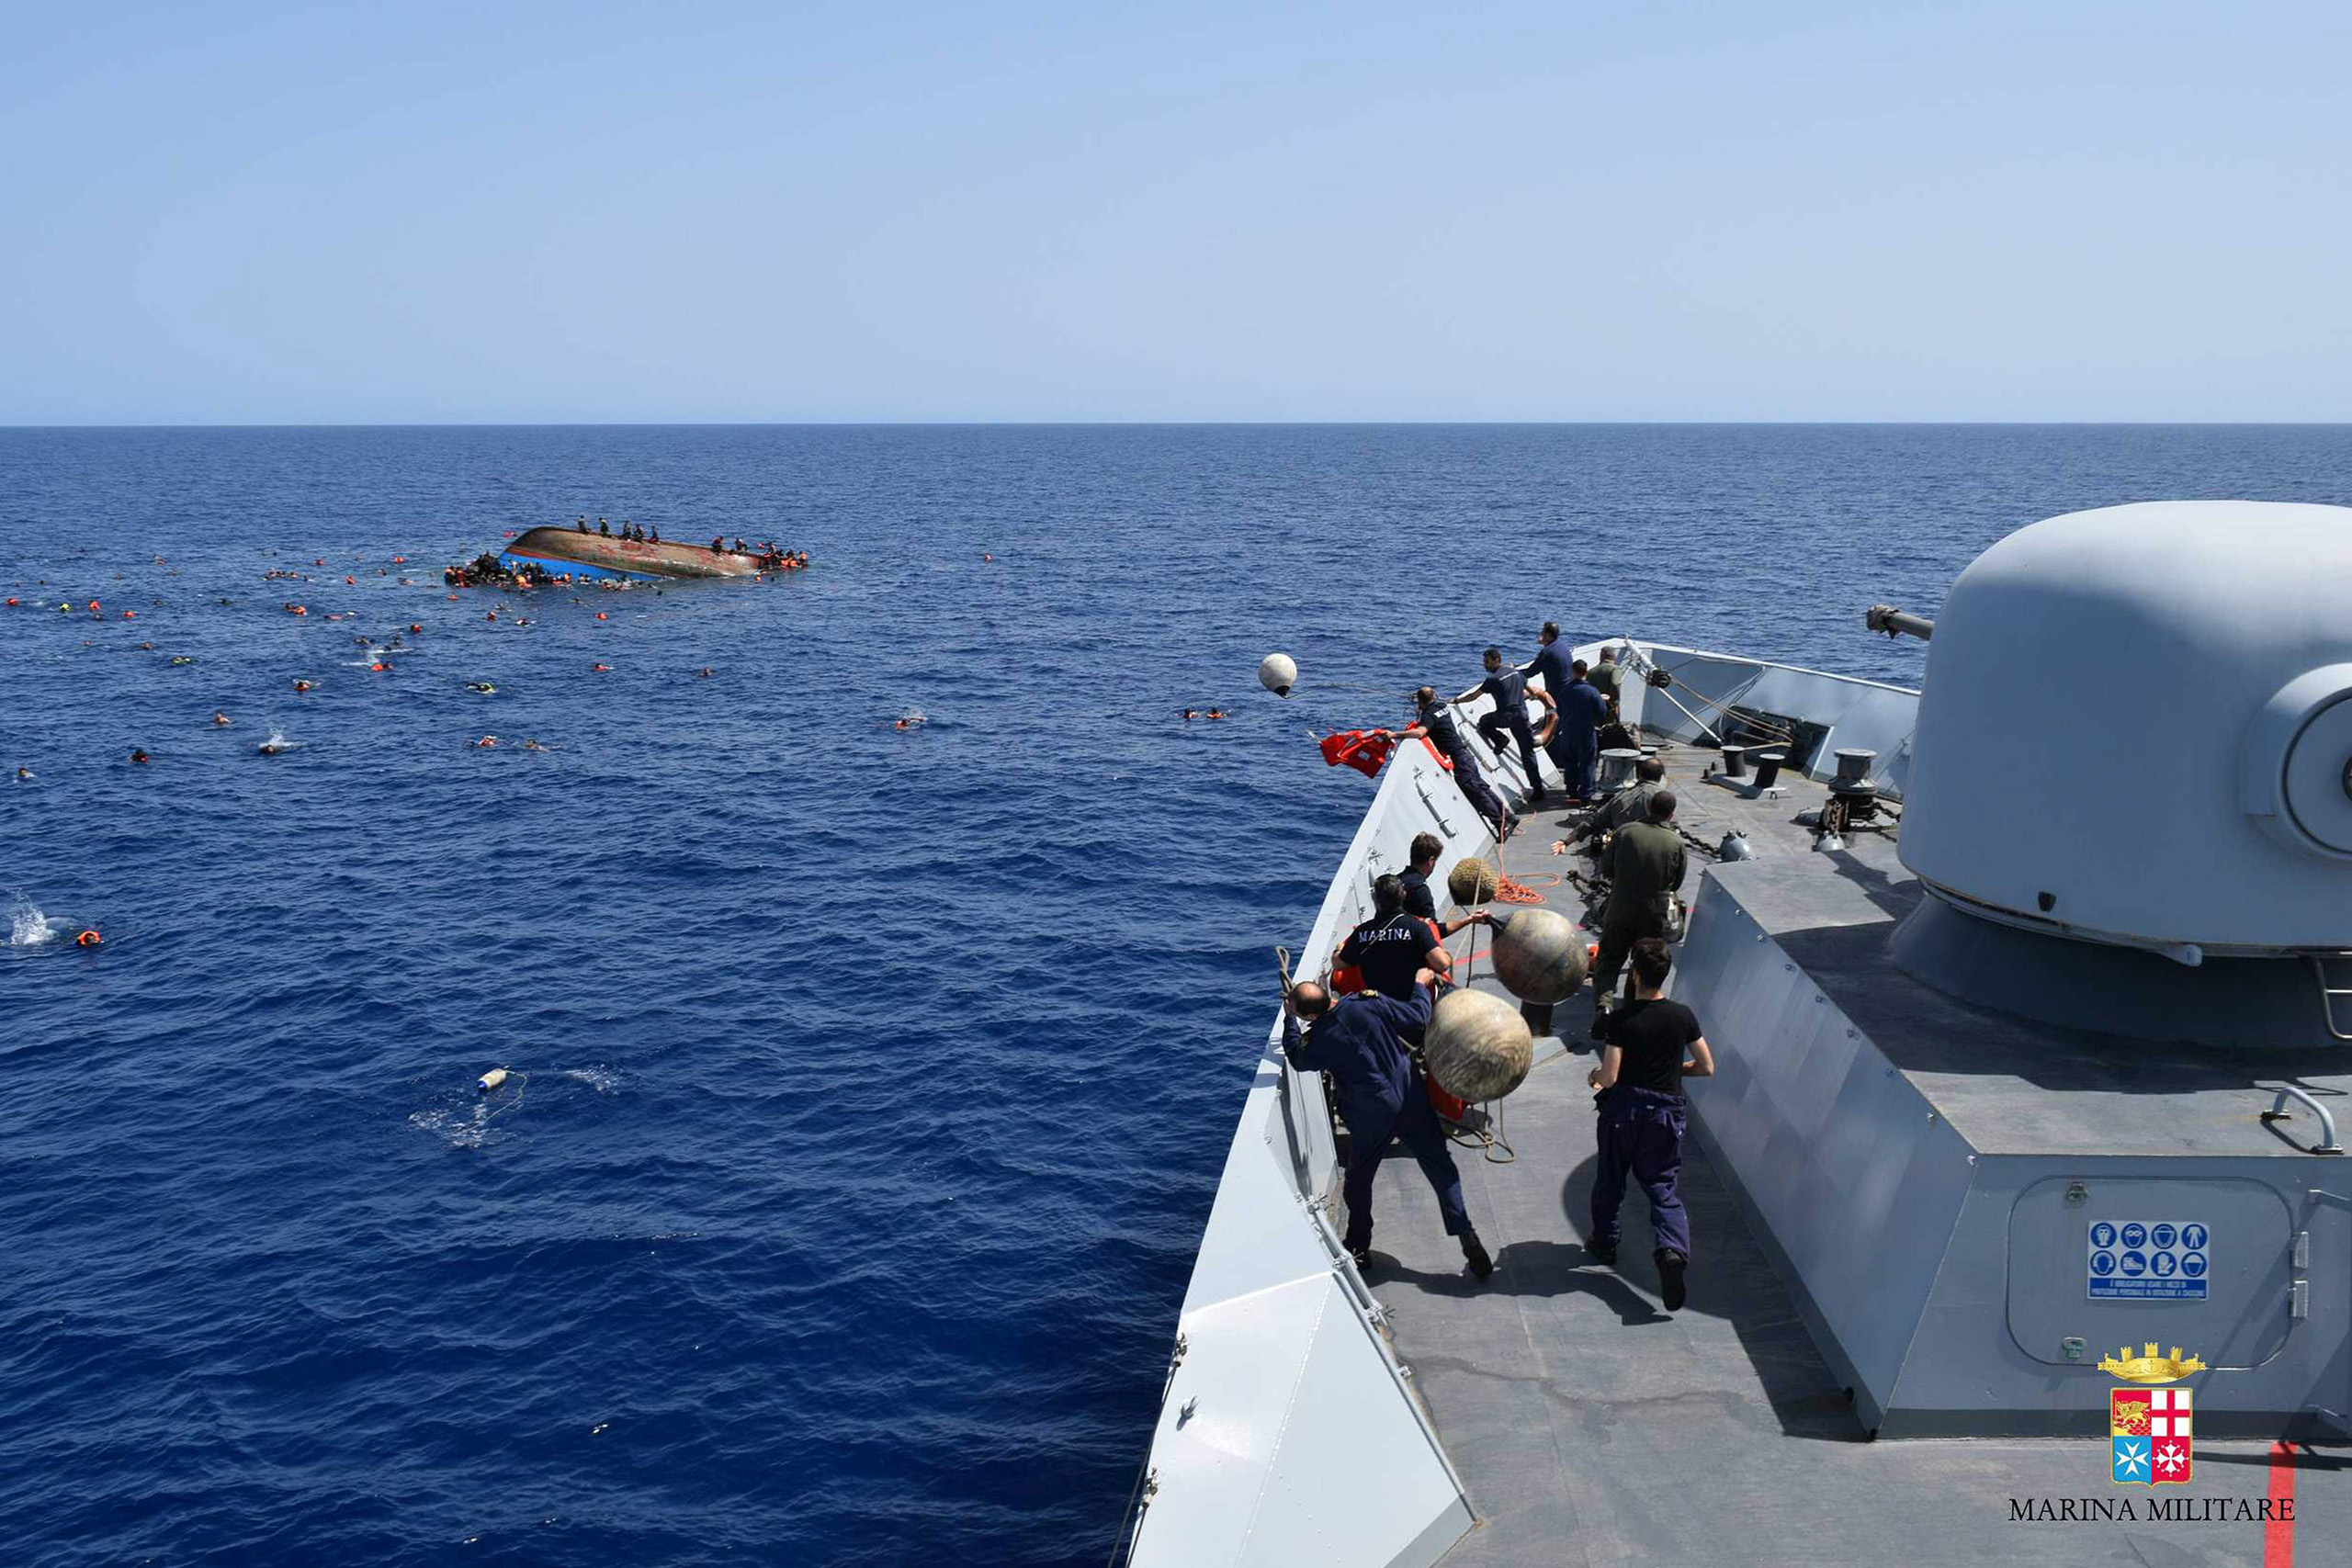 The capsized boat seen from the Italian navy’s Bettica patrol boat. (Italian Navy/AFP/Getty Images)